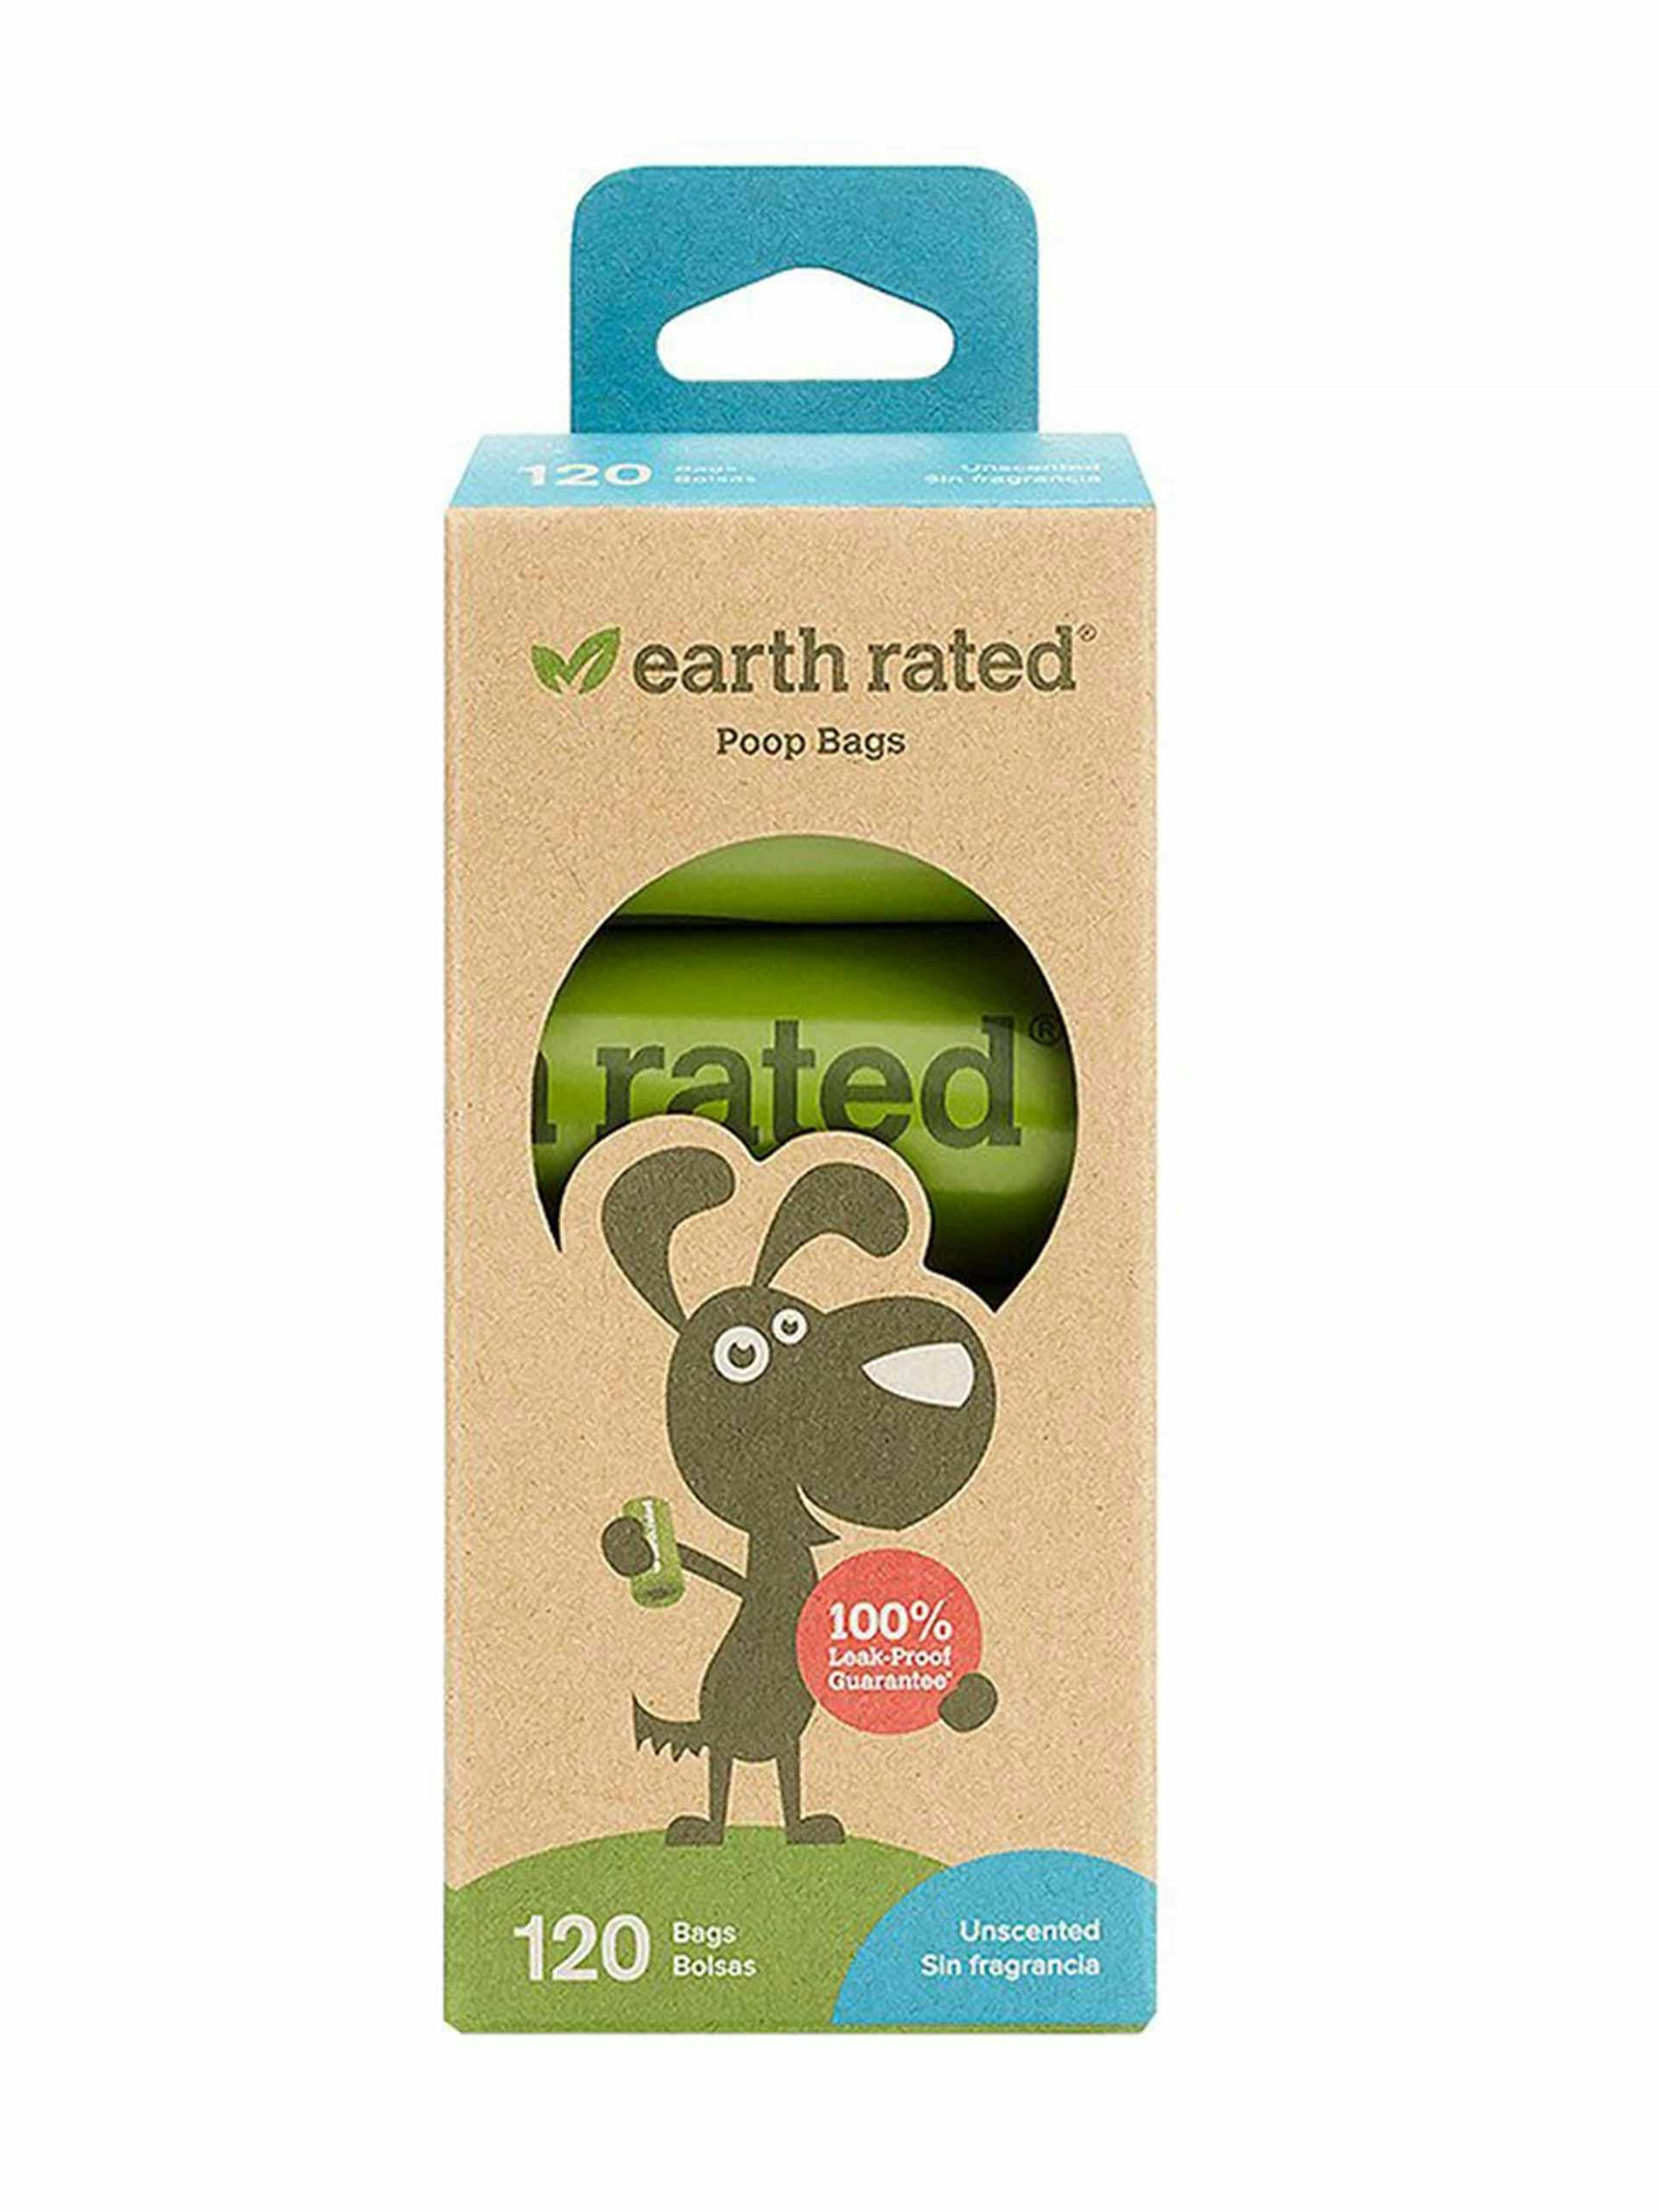 Earth rated unscented poop bags